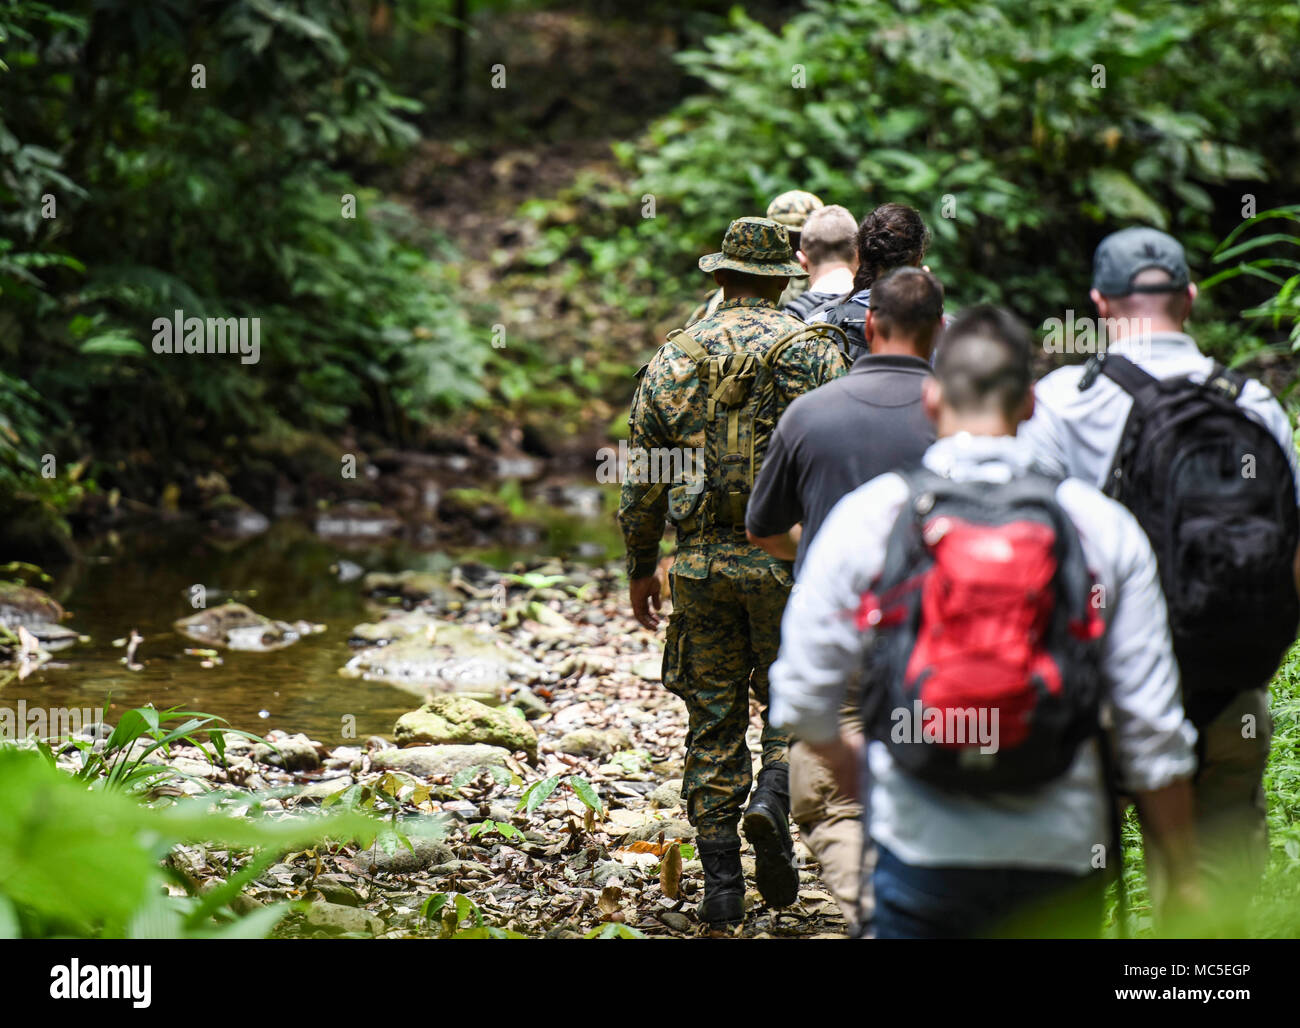 Members of the 346th Air Expeditionary Group hike along a trail in the Darien National Park, Panama, April 2, 2018, during exercise New Horizons 2018. Following the hike, 346th AEG members spoke to local village members about the assistance that New Horizons 2018 will bring to the communities throughout the region. Exercise New Horizons is a joint training exercise where all branches of the U.S. military conduct training in civil engineer, medical and support services while benefiting the local community. (U.S. Air Force photo by Senior Airman Dustin Mullen/Released) Stock Photo